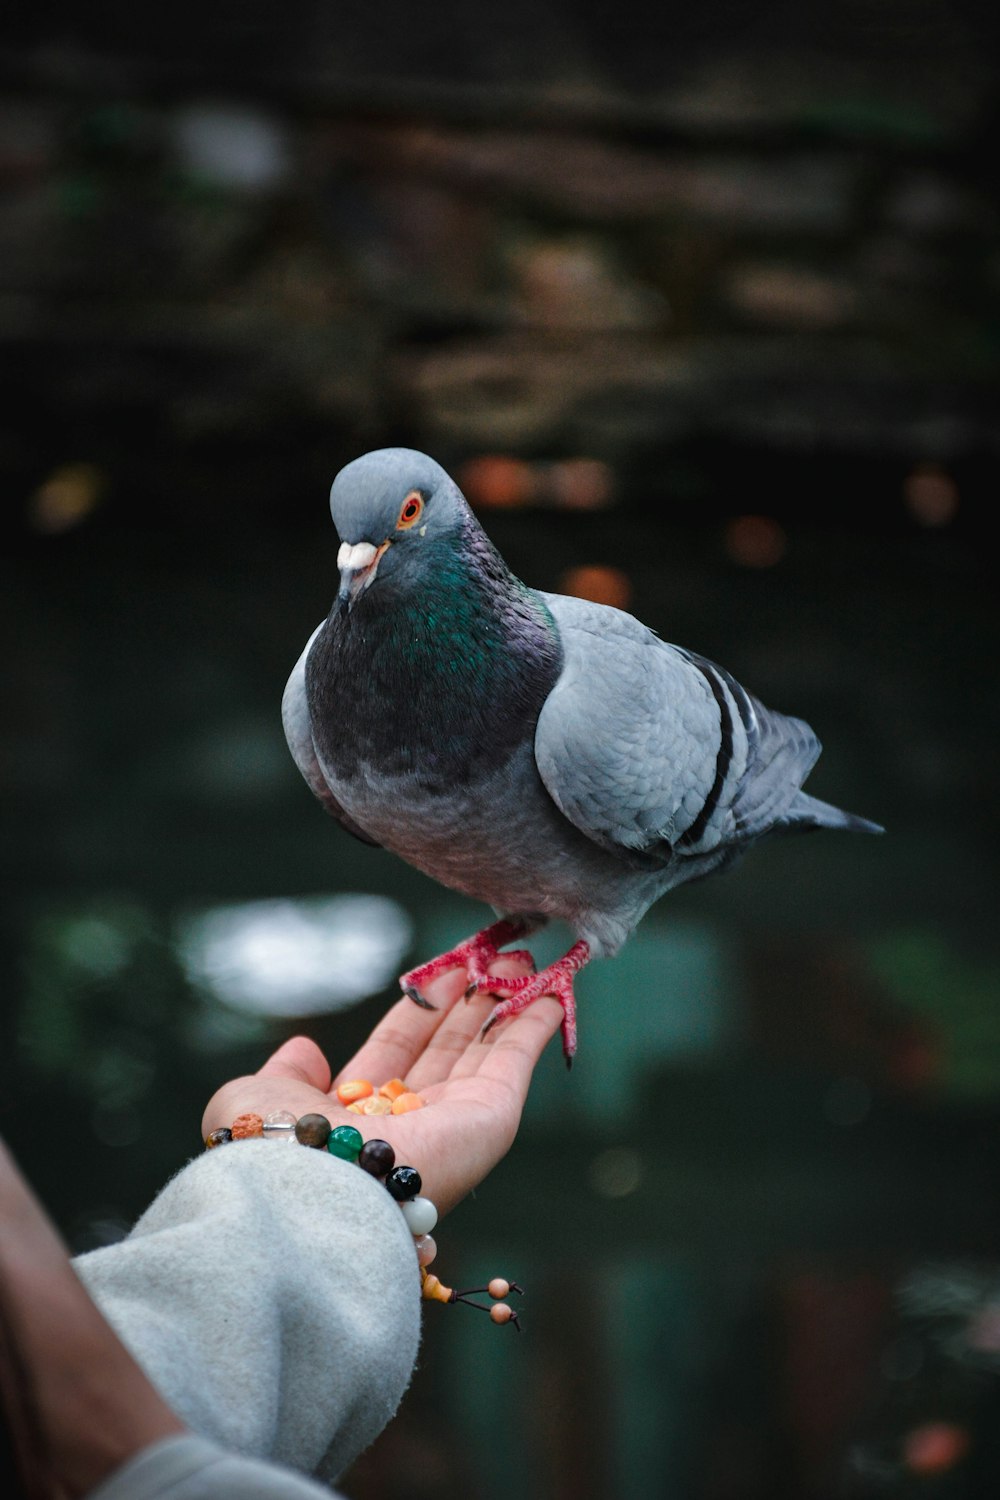 a pigeon perched on the hand of a person